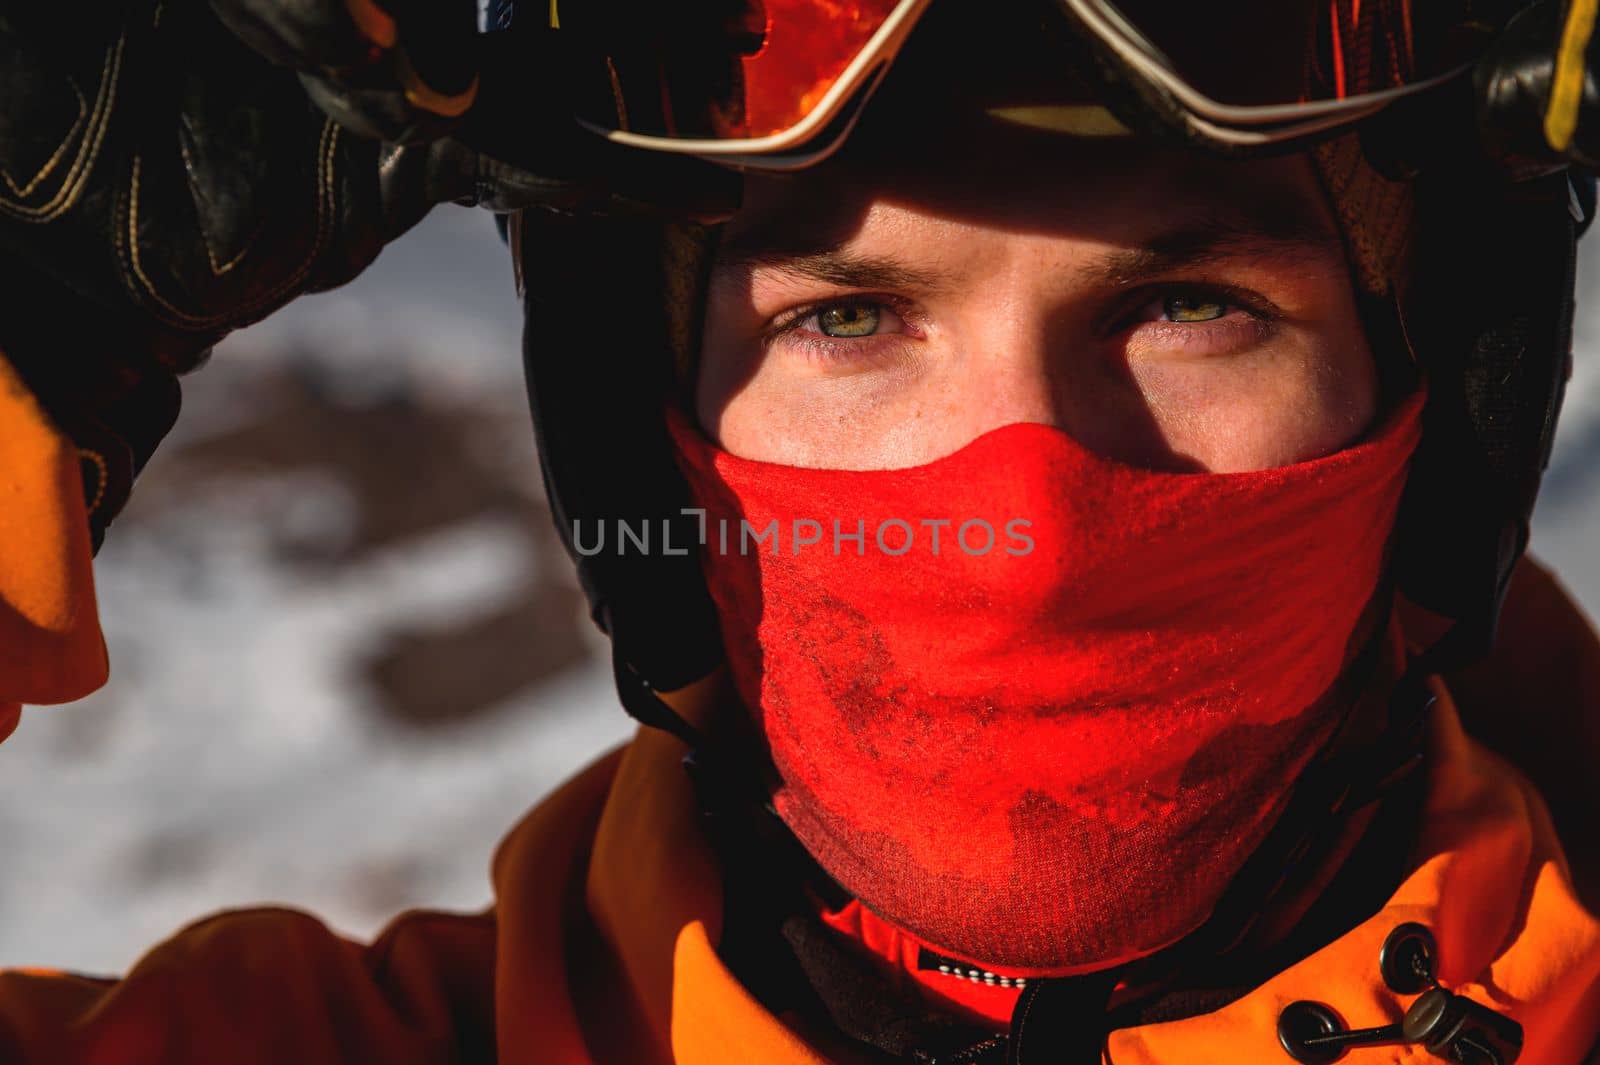 A young man looks directly into the camera, close-up of the eyes. Hands holding ski mask or goggles, expressive look.